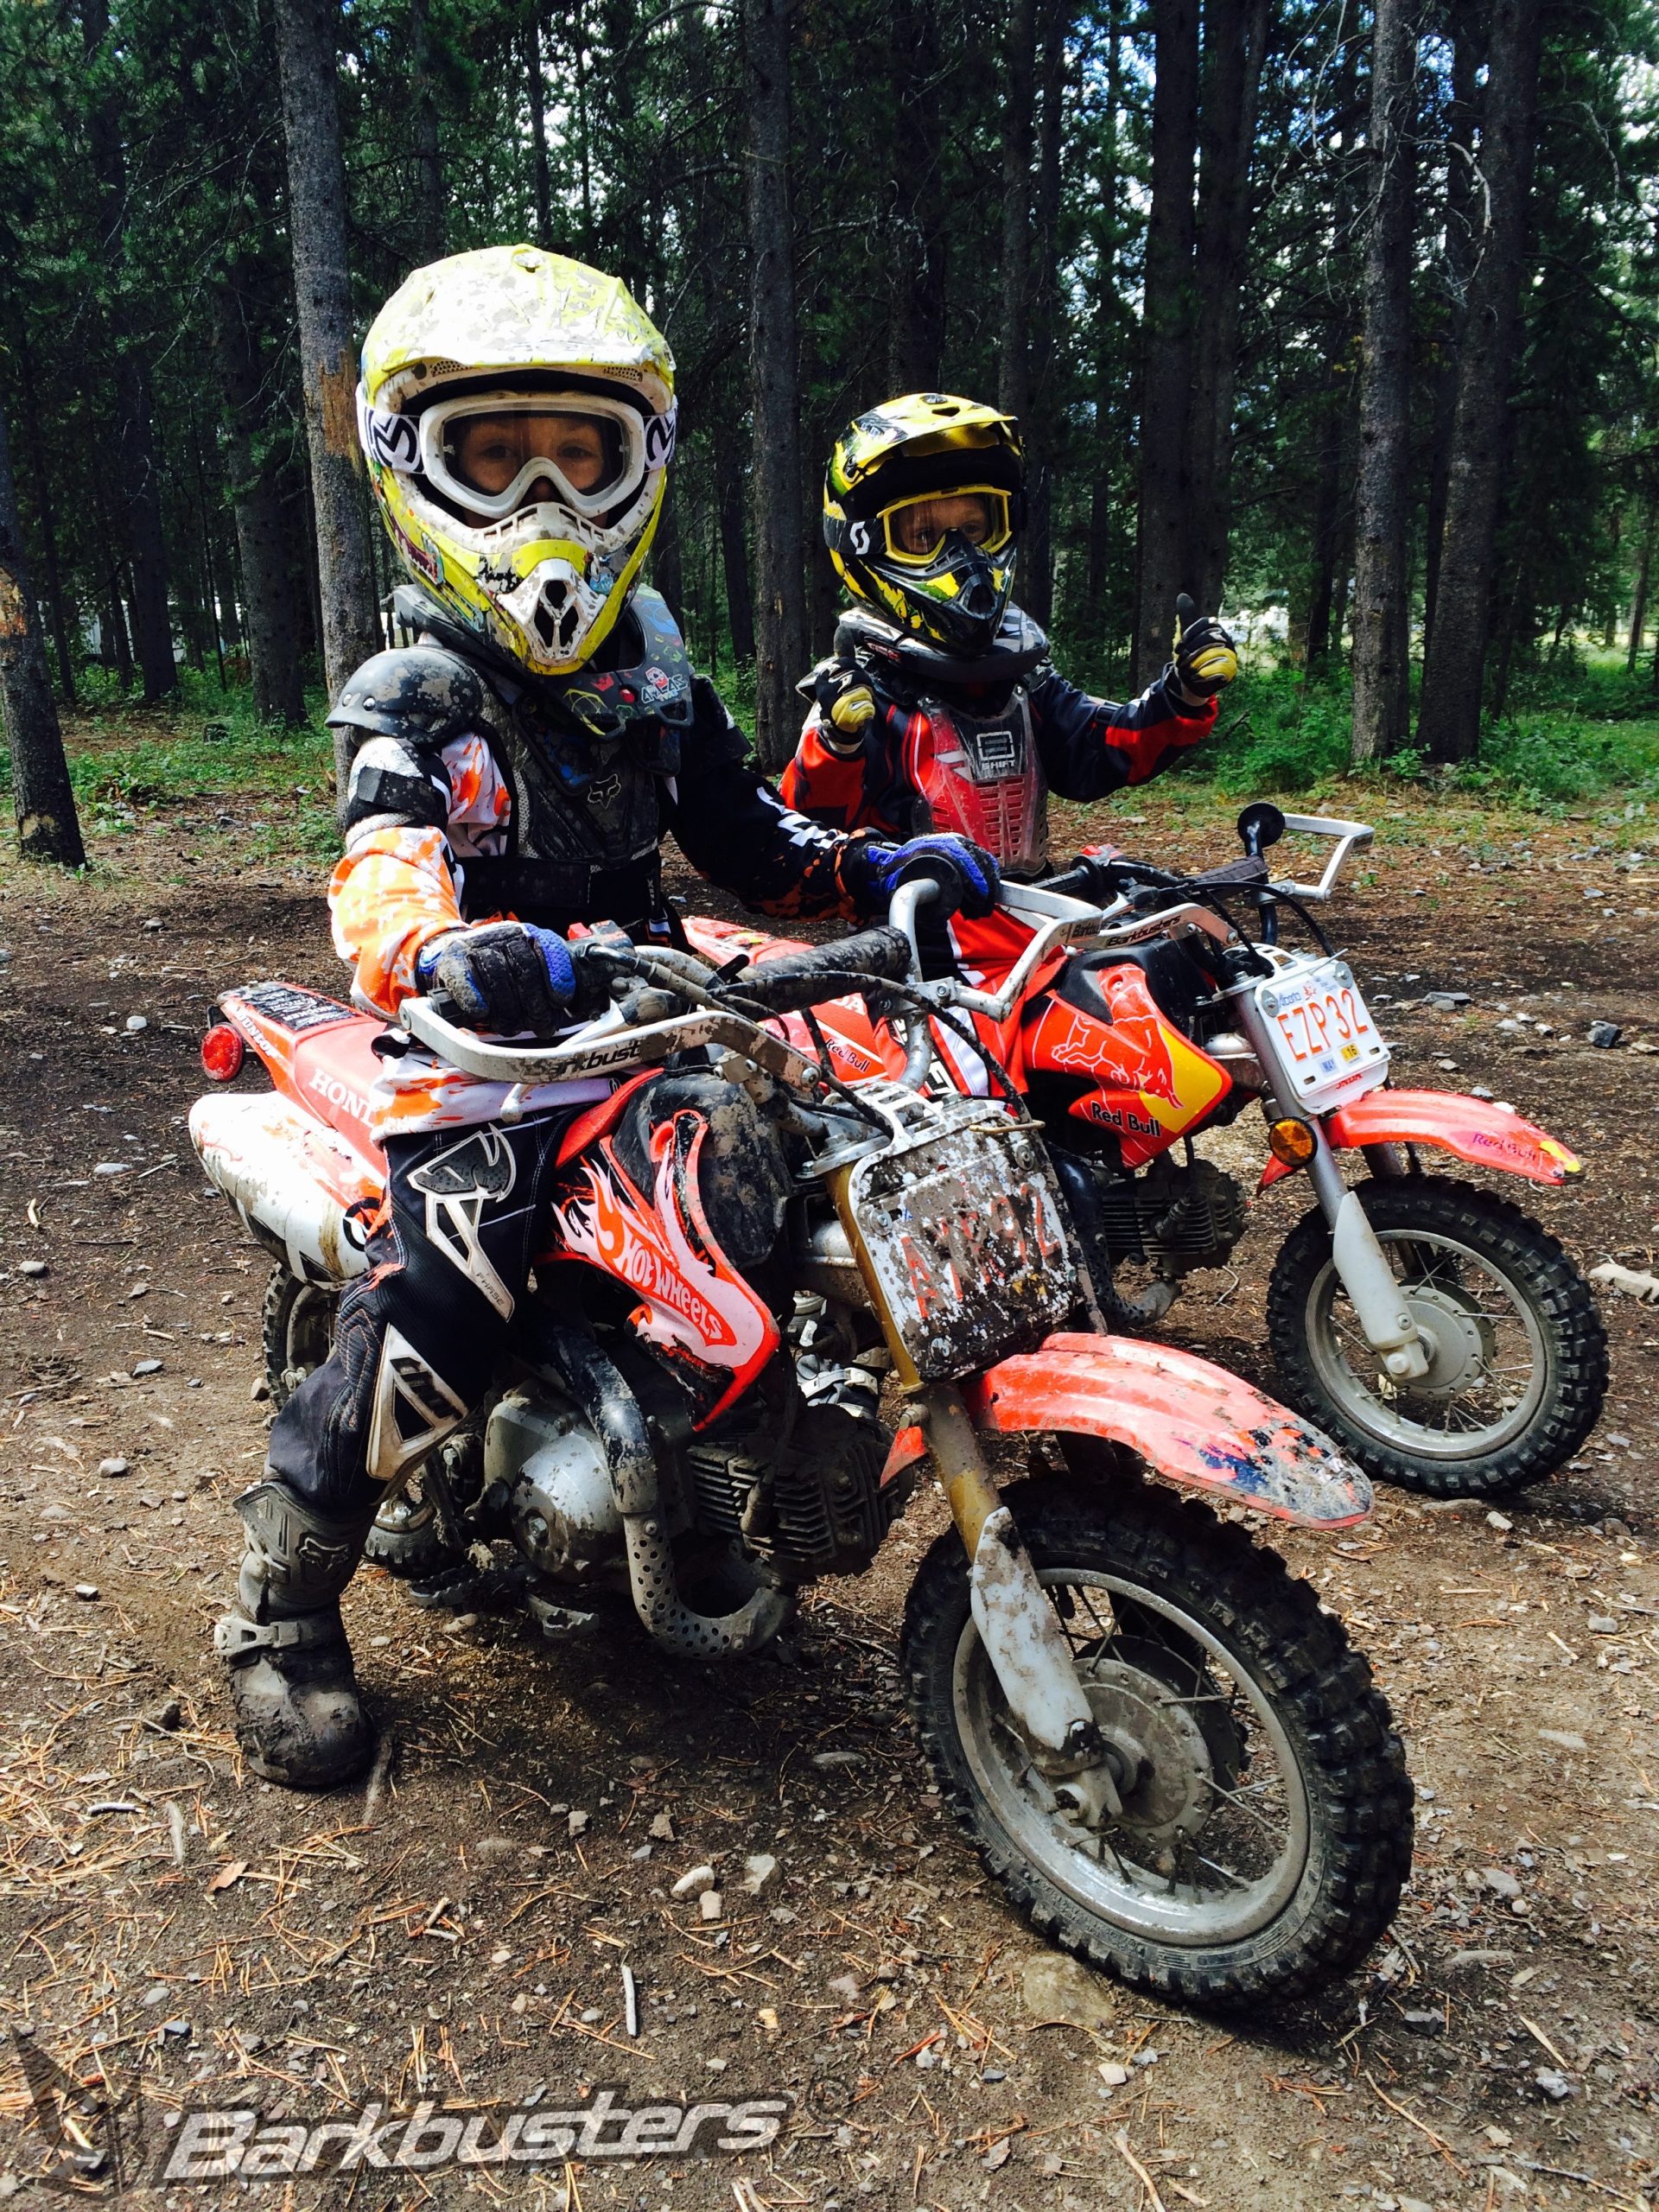 BARKBUSTERS Mini Hardware Kit – Two Point Mount (Code: BLG-018) fitted to HONDA CRF50.  Benjamin and Reid at Alberta, Canada.